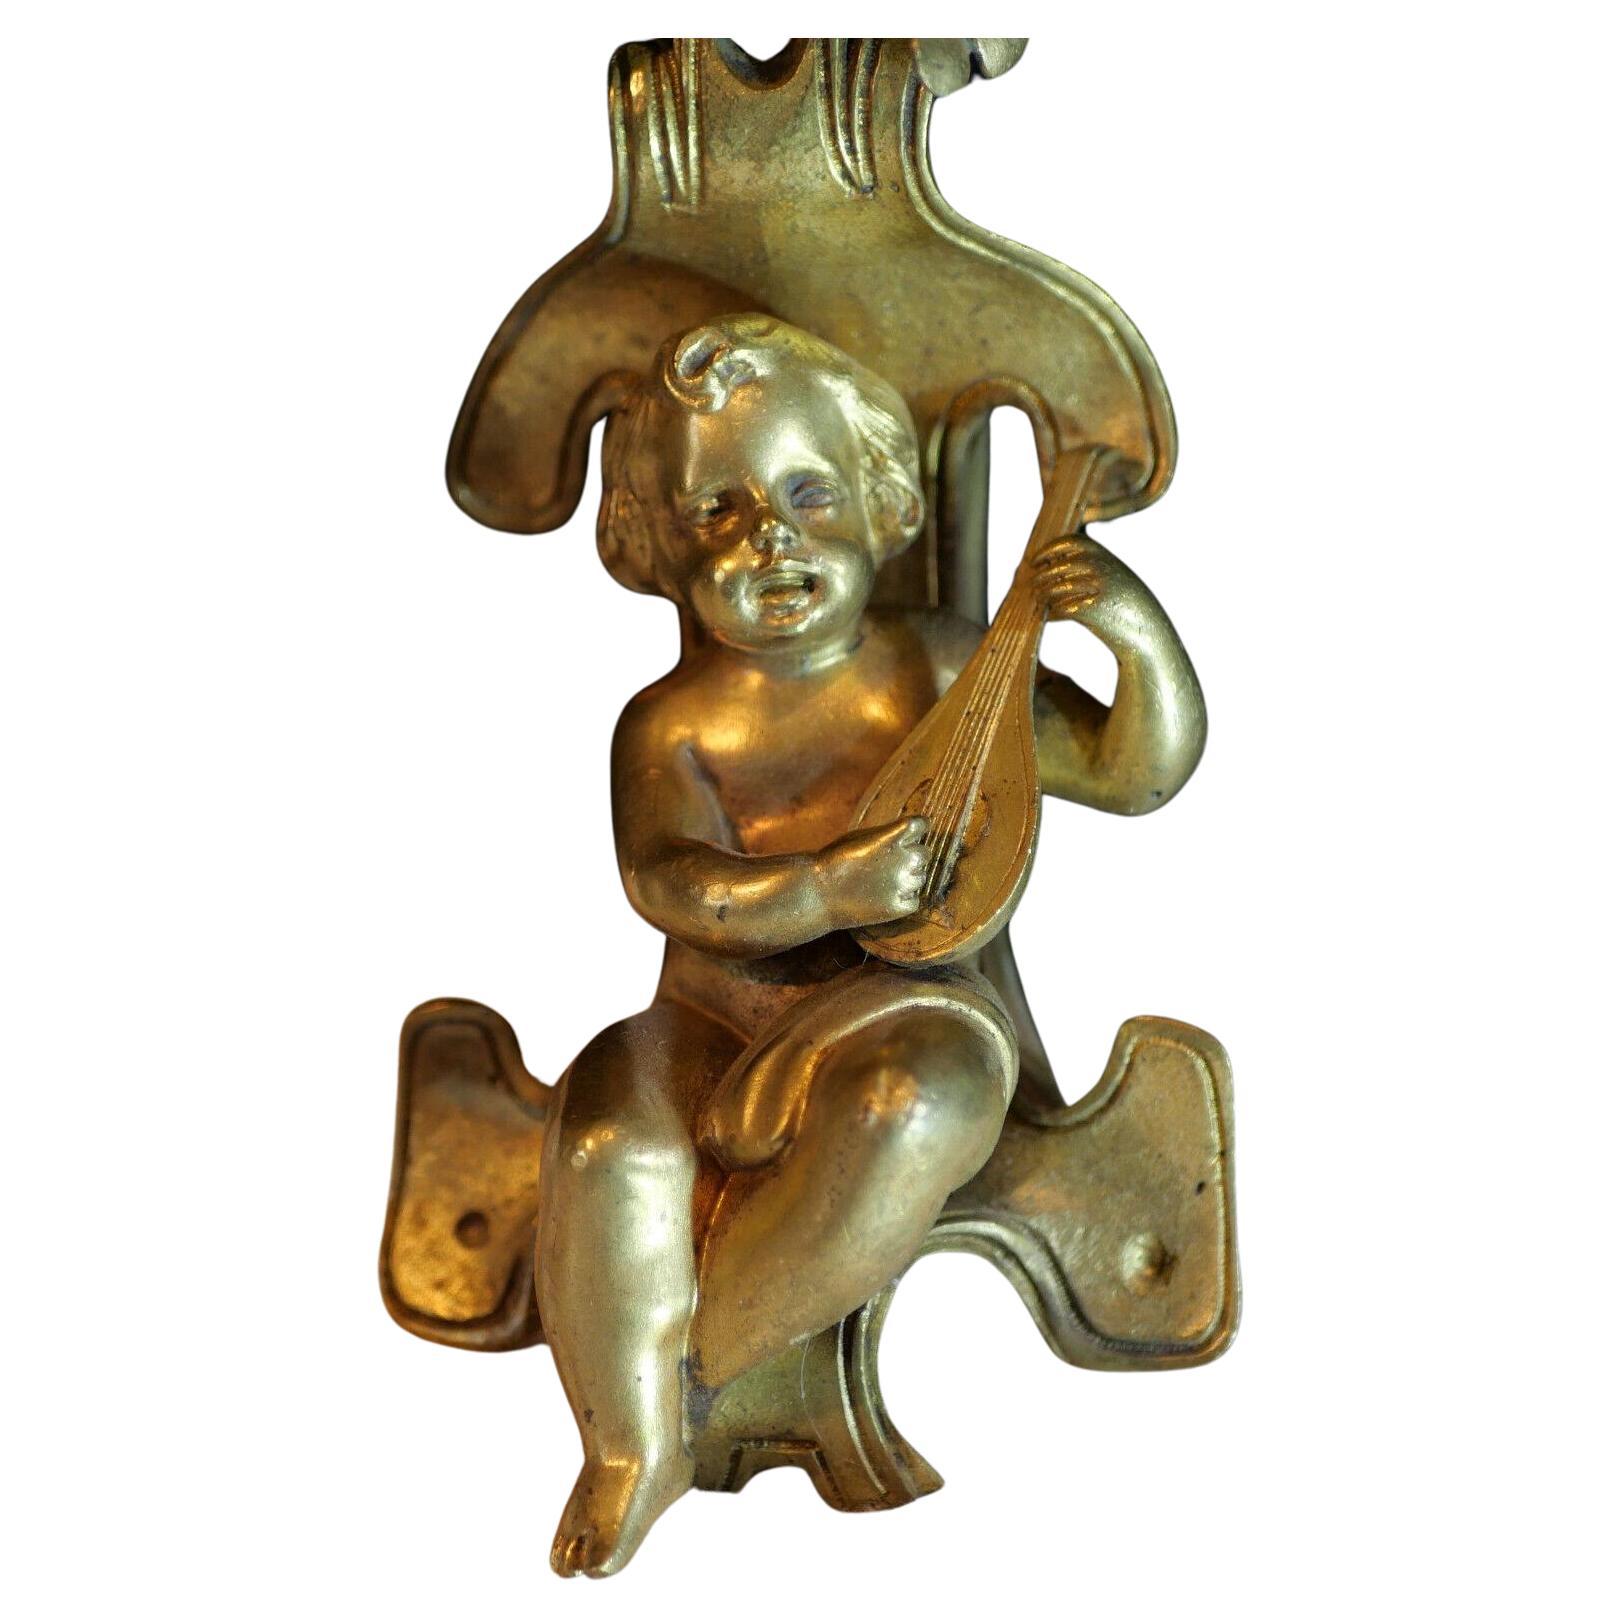 c1800 Pair French Louis XVI Rococo style Gilt Bronze Musical Cherubs. The Cherub sitting un the hovering foliage. Excellent detail, very high quality pair of Sconces. Original unelectrified state.